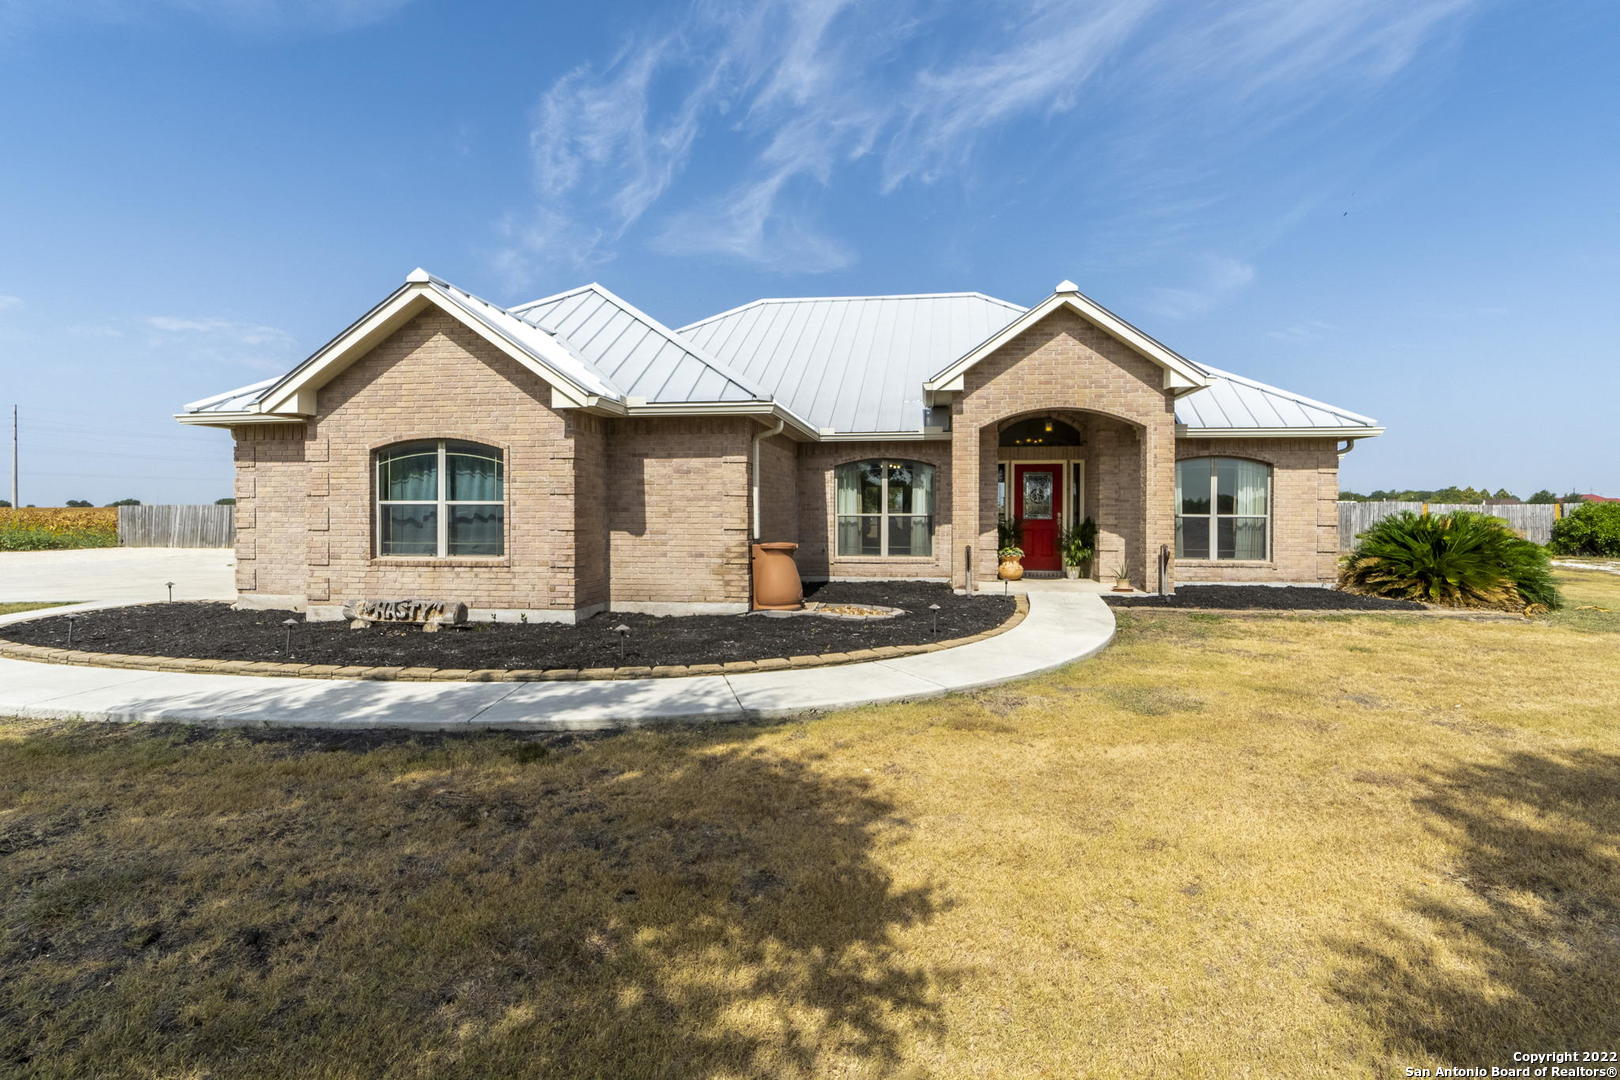 This spacious, beautiful, all-brick one-story home sits on 1.77 acres, just down the road from the highly acclaimed Navarro ISD schools. This home is perfect for inside and outside entertaining! Breakfast bar, built-in desk, formal dining room, open floor-plan with hardwood laminate & stained concrete in main traffic areas. Plenty of storage inside this home. Additional storage in the backyard for equipment or household items in the huge outside storage building with attached RV carport, including a 30-amp electric service. Enjoy cooling off each day in your own private pool or under the covered back patio. No HOA!!!